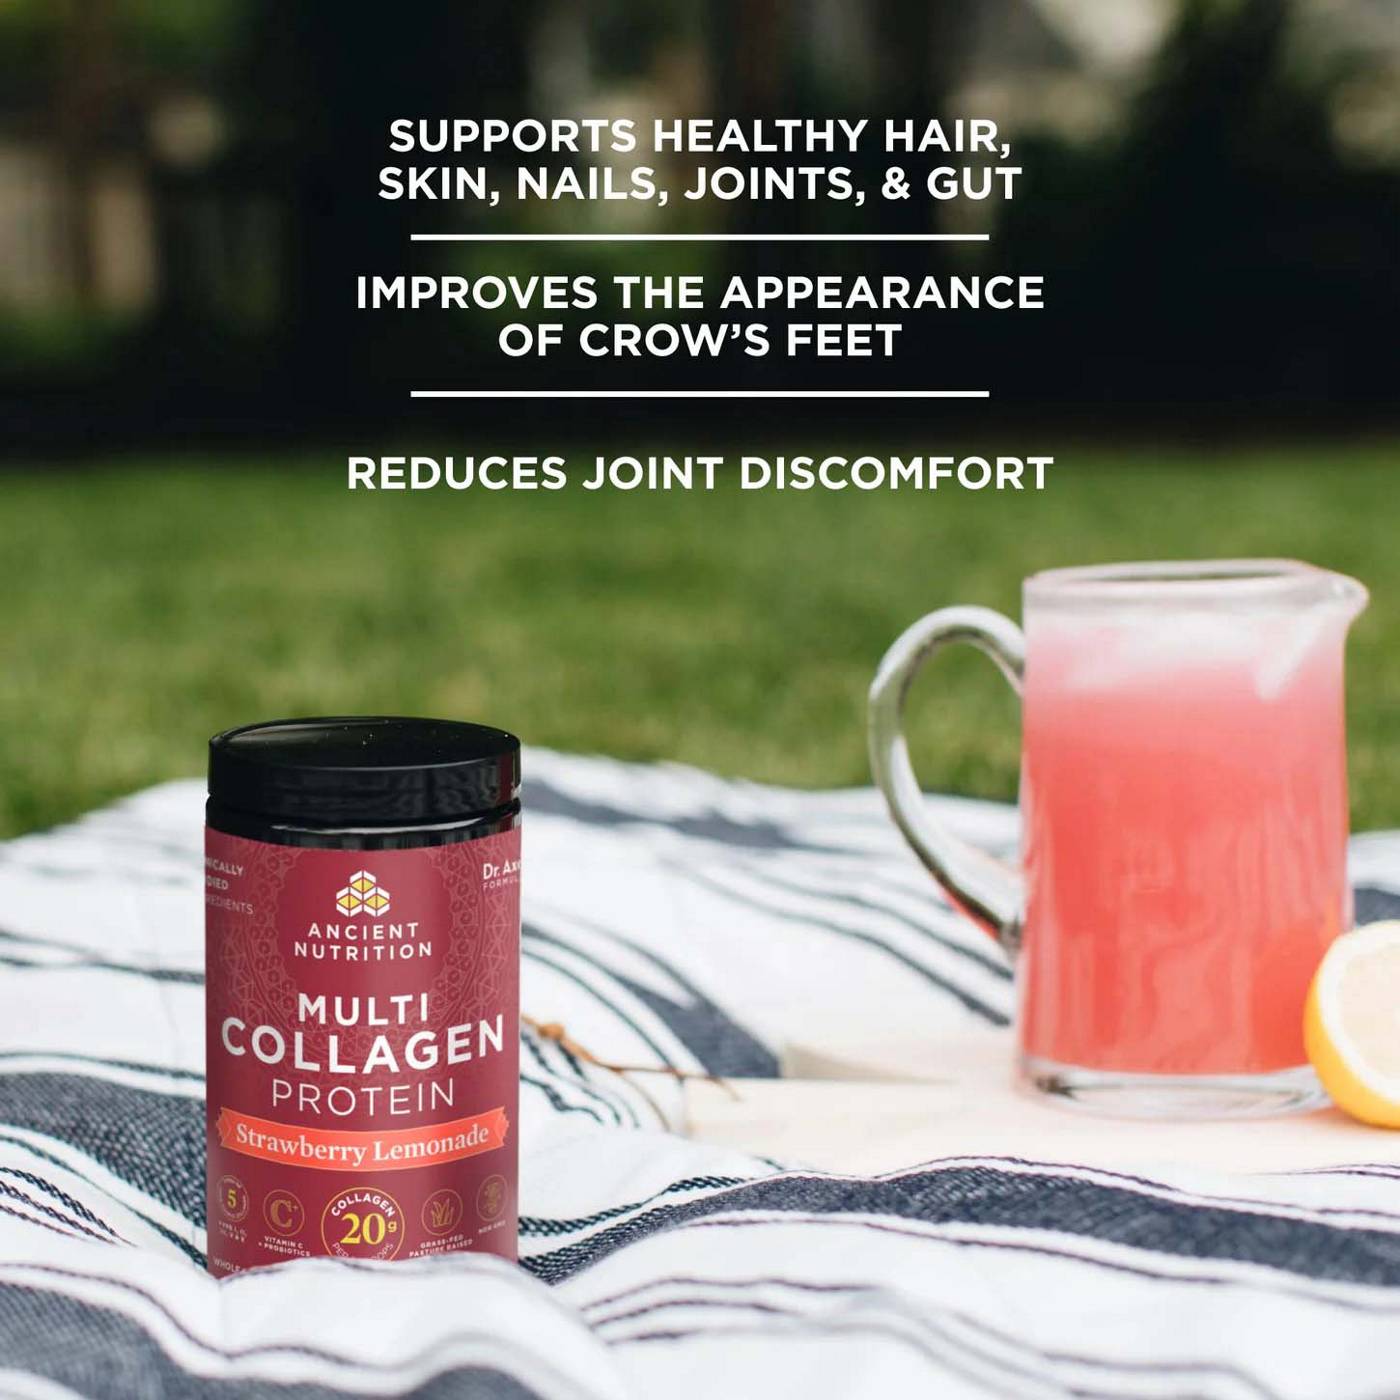 Ancient Nutrition Multi Collagen Protein Supplement - Strawberry Lemonade; image 8 of 8